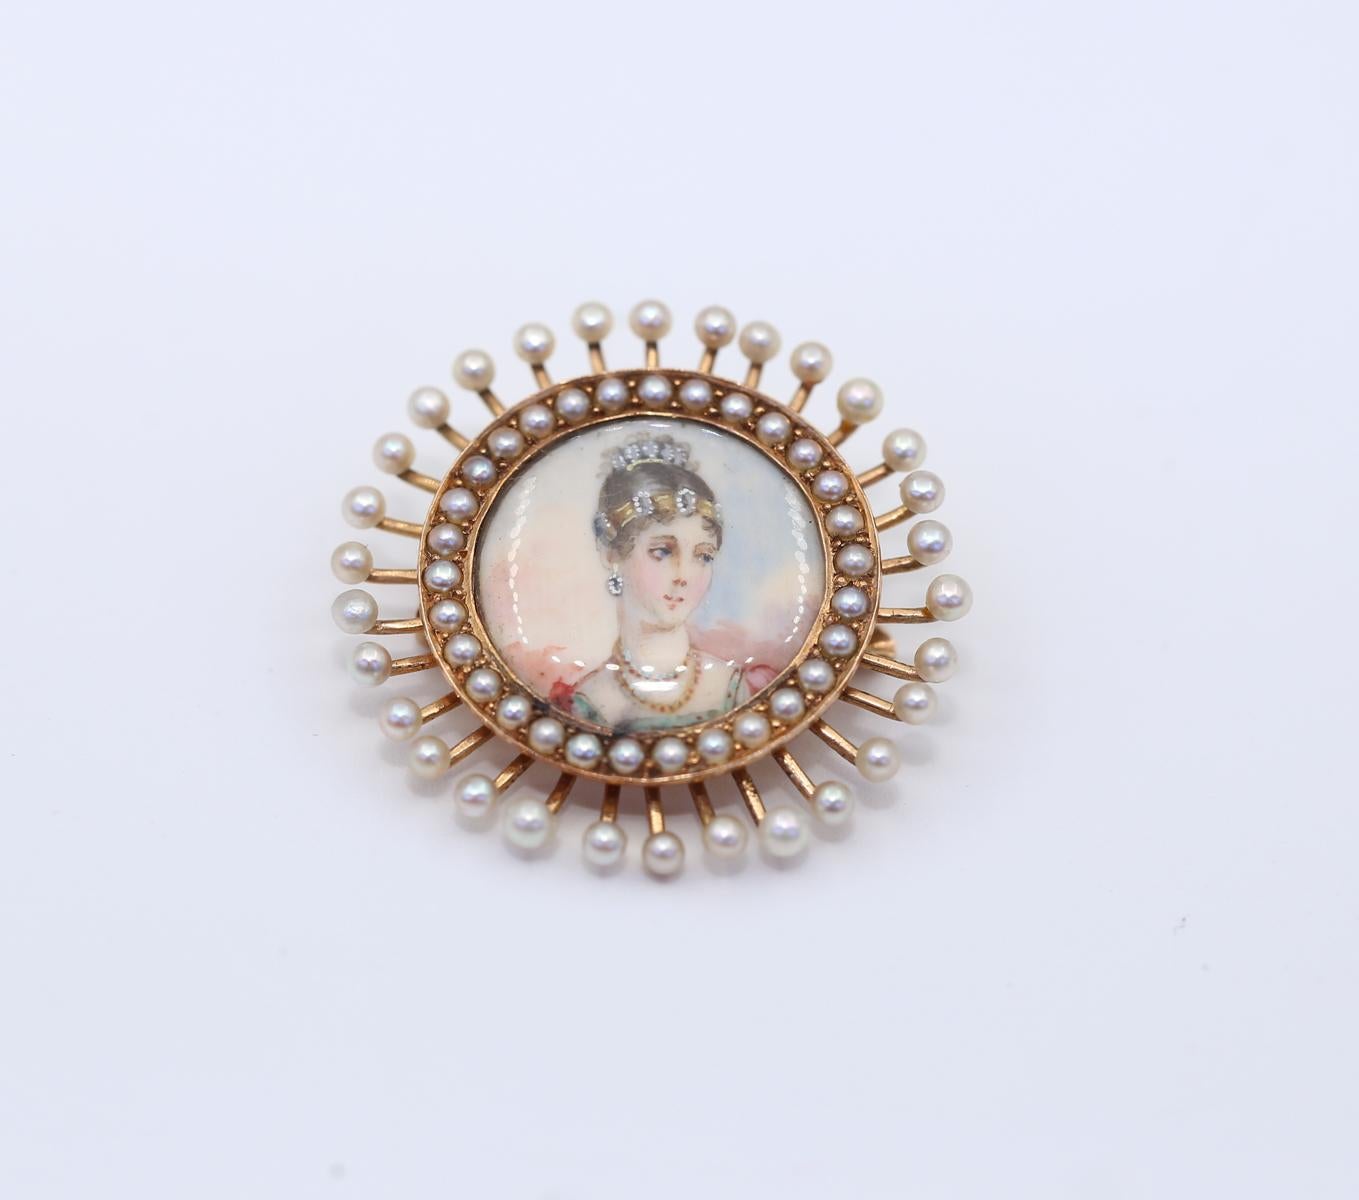 Pendant Brooch Portrait Lady Pearls 14K Gold 27 March, 1890.
Amazingly delicate and marvelous painted ladies' portrait surrounded by fragile Pearl beads on tiny legs and another line of Pearls on the inner circle. An item to have in any jewelry